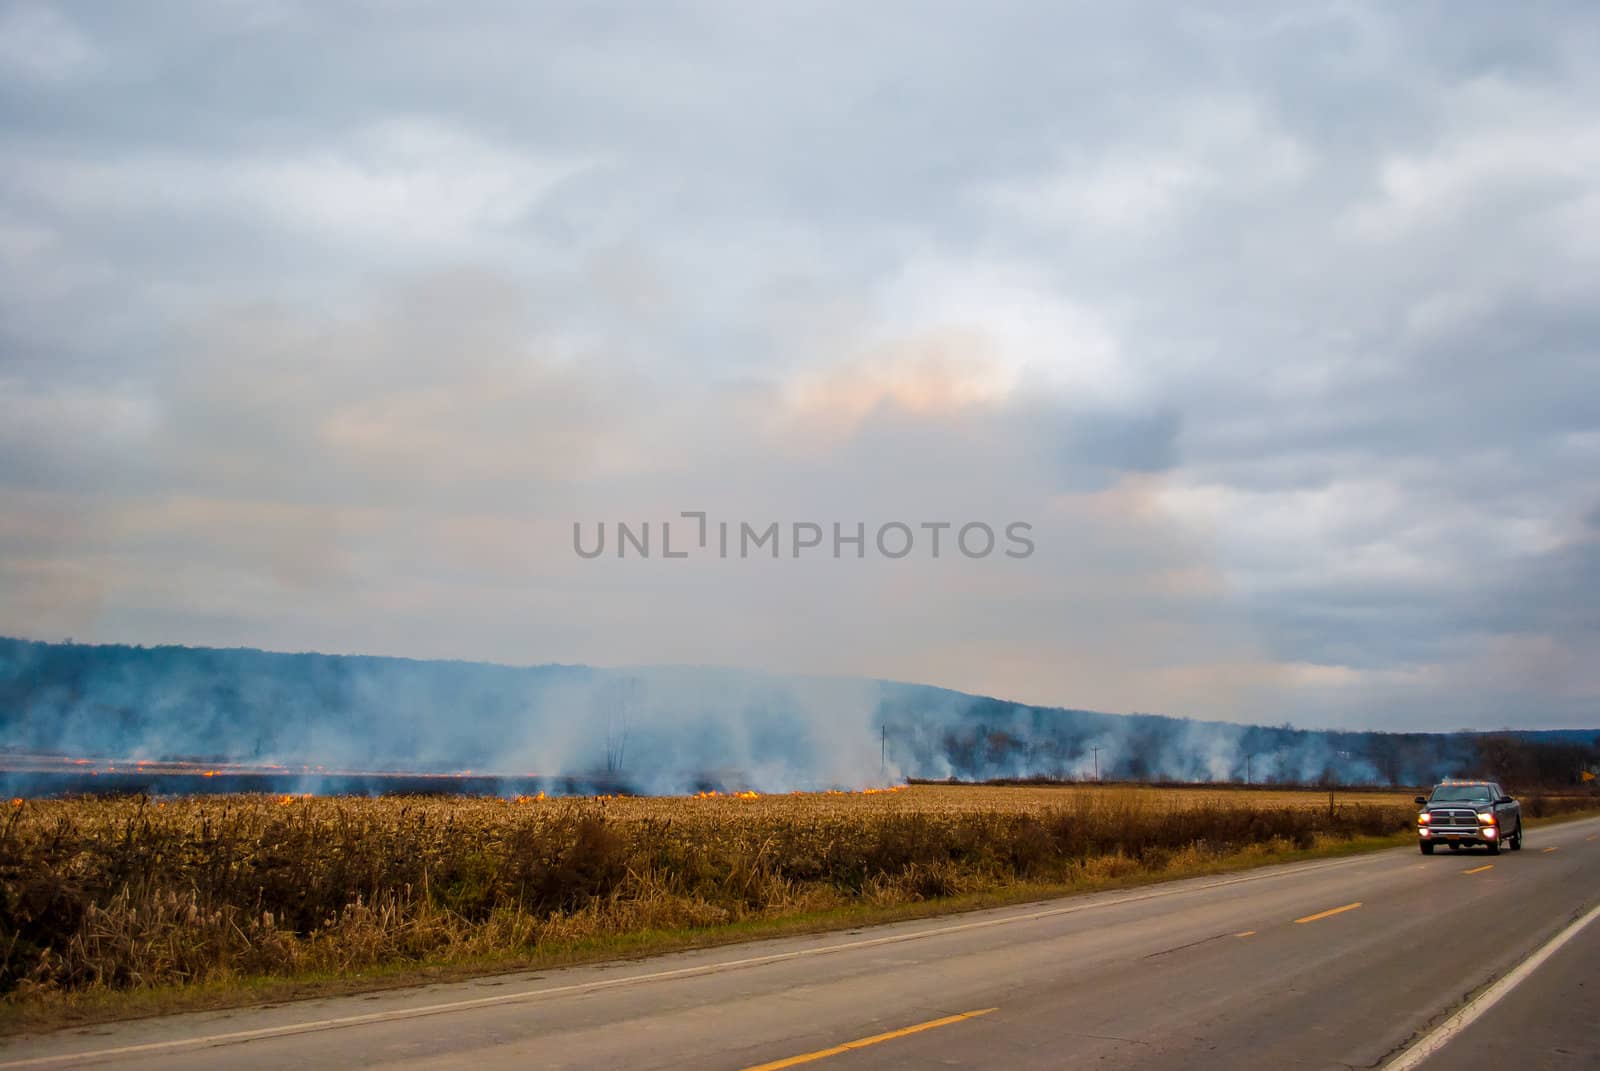 Photograph of a controlled agricultural burn set to clear a field after the crops had been harvested.